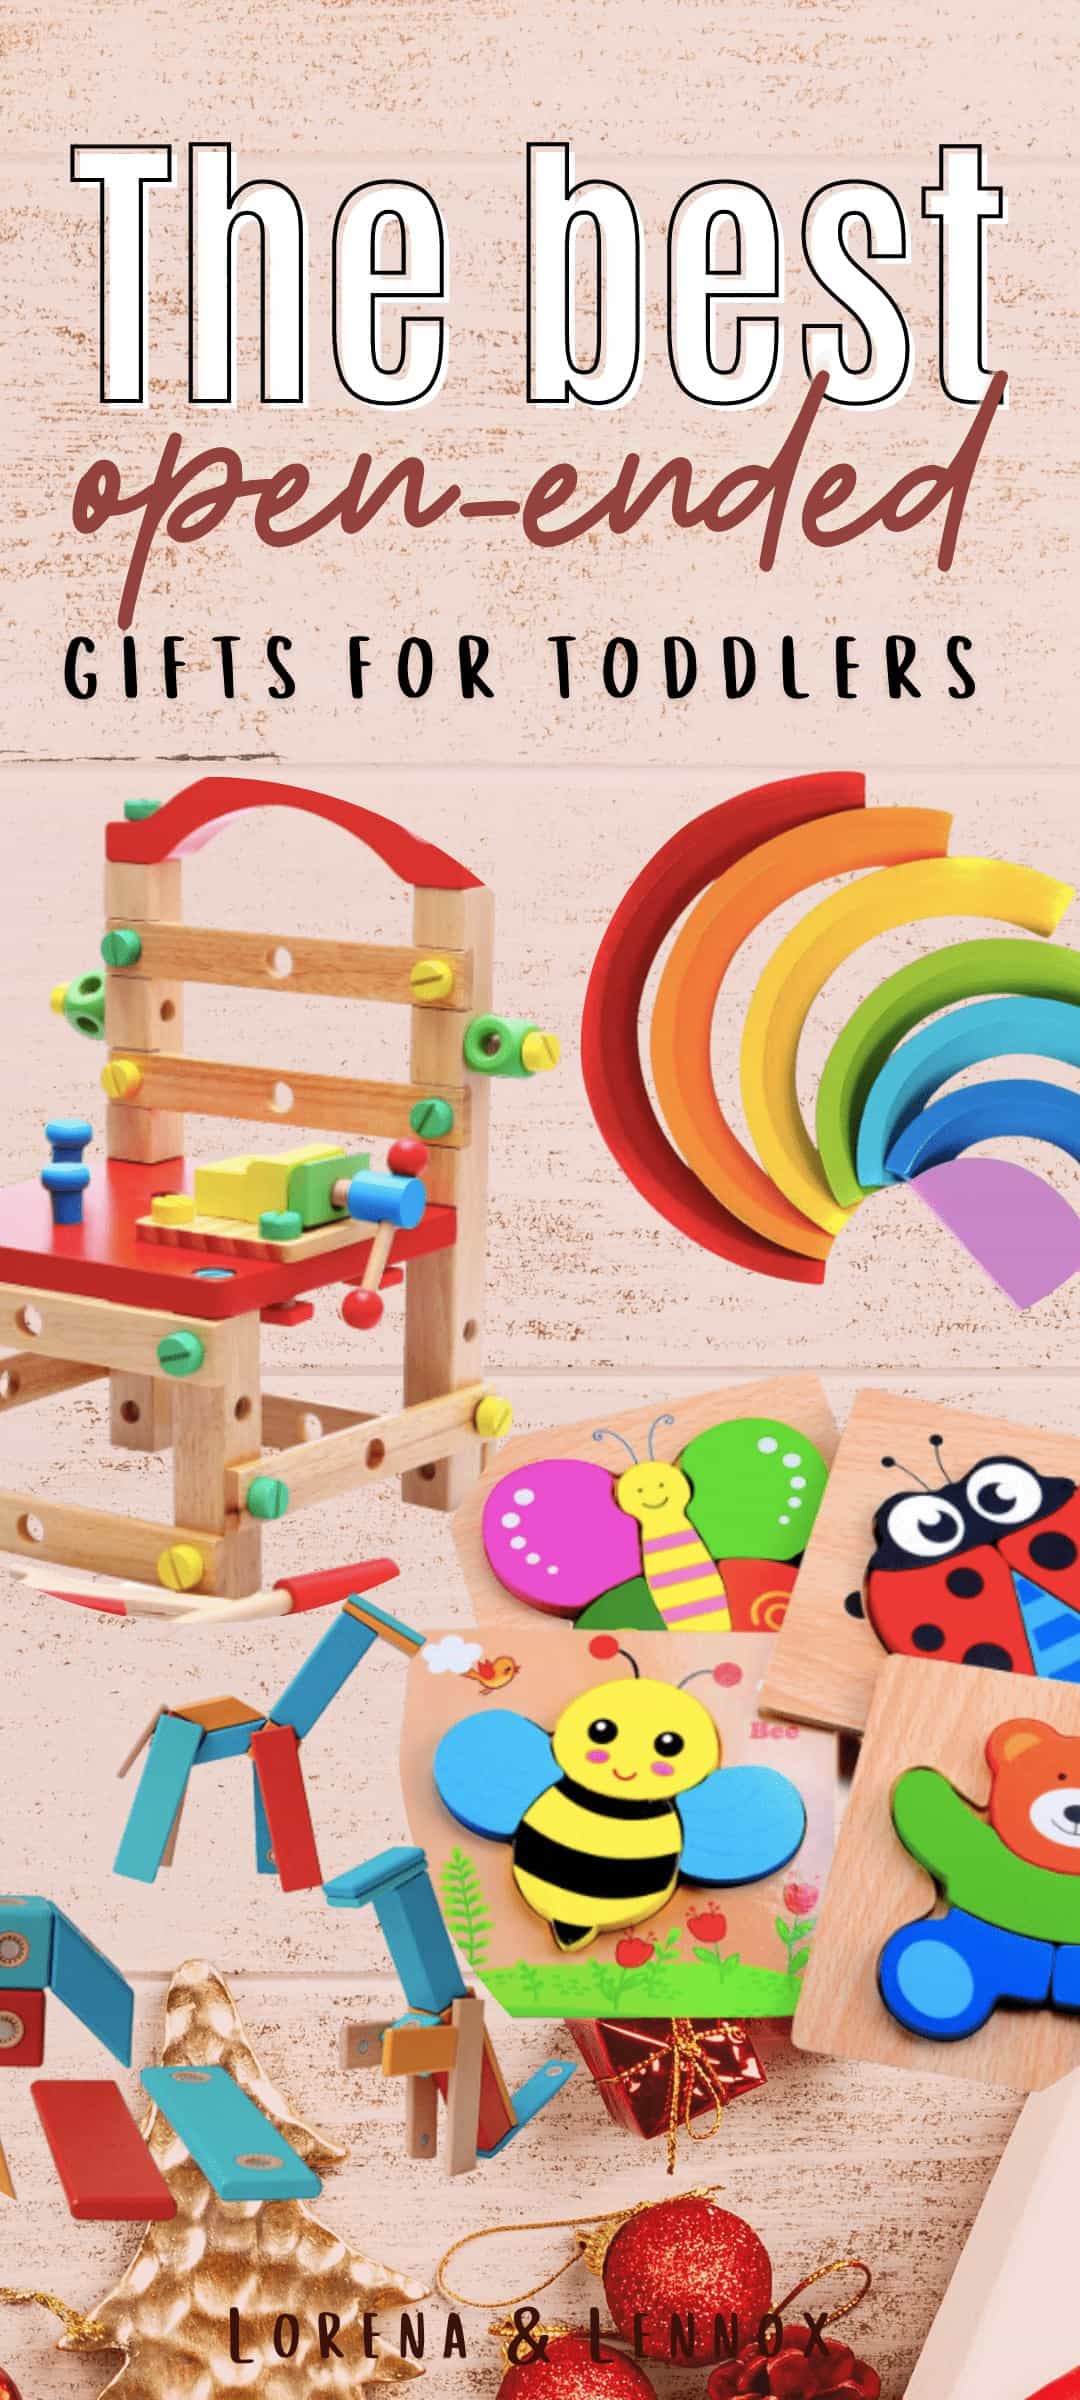 The Best Open-Ended Toys for Bilingual Toddlers and Preschoolers #toddlergiftguide #preschoolgiftguide #openendedtoys #thebesttoddlertoys #thebestpreschoolertoys #educationaltoddlertoys #educationalpreschooltoys #montessoritoys #loospartsplay #playbasededucation #bilingualkids #toysforbilingualkids